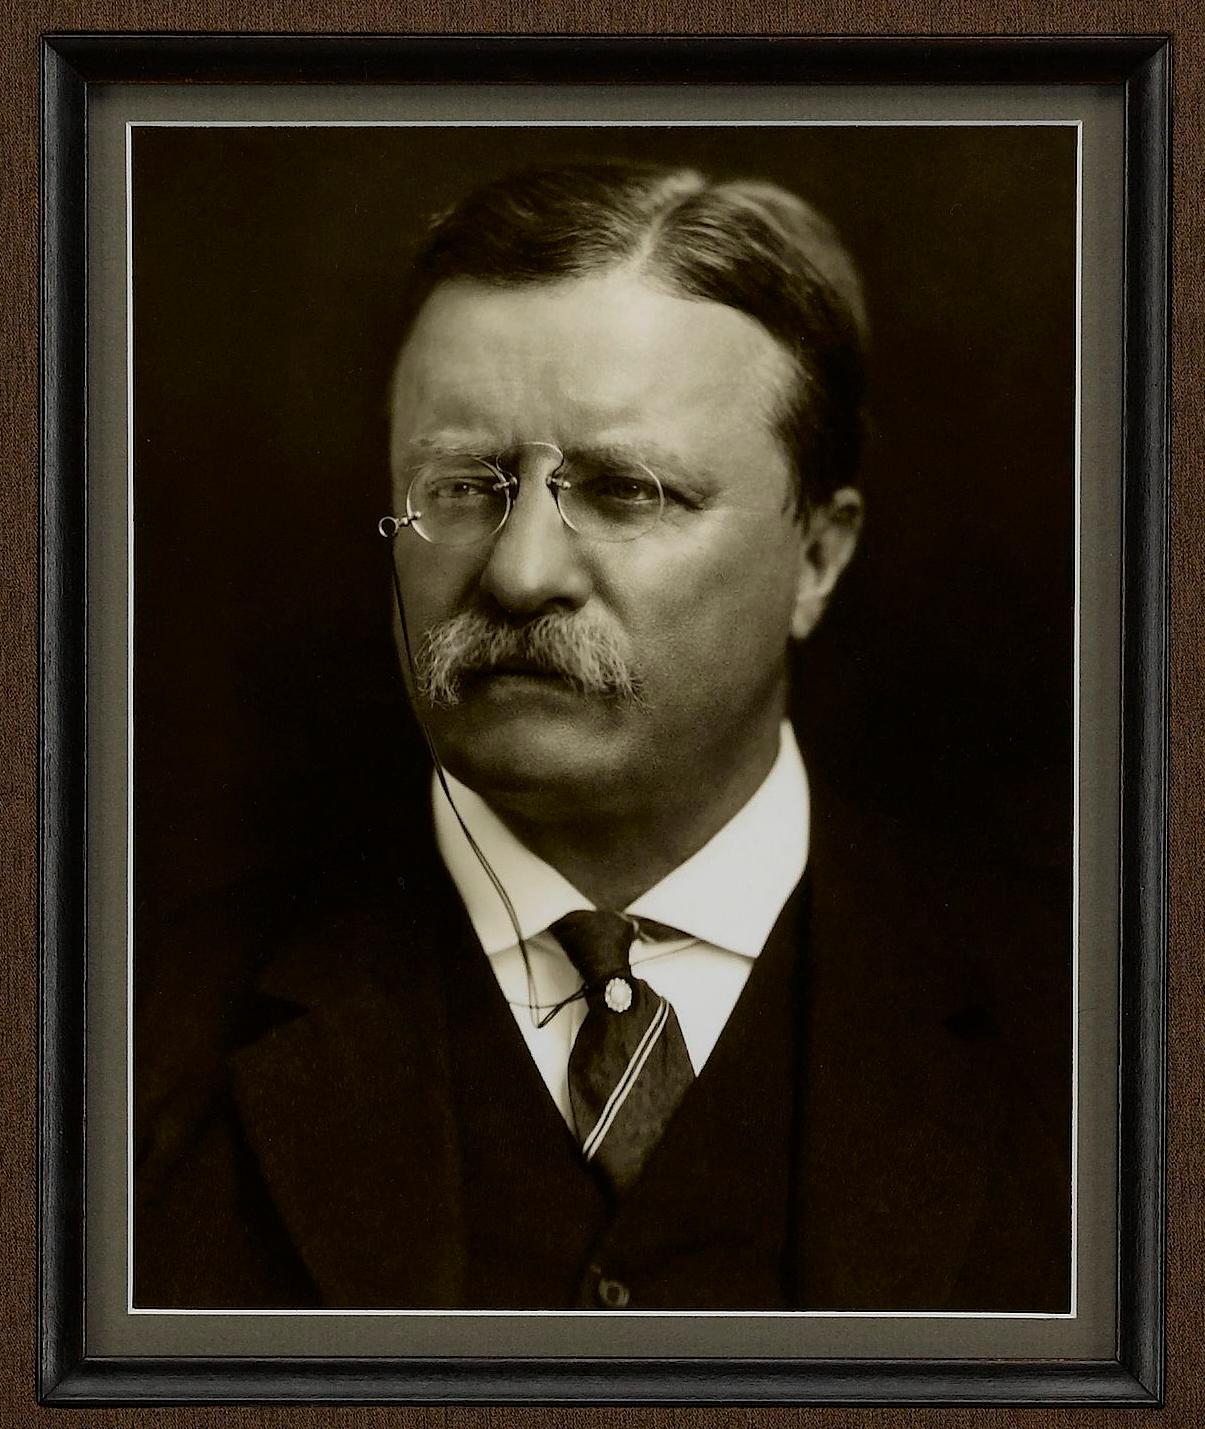 sell theodore roosevelt autograph